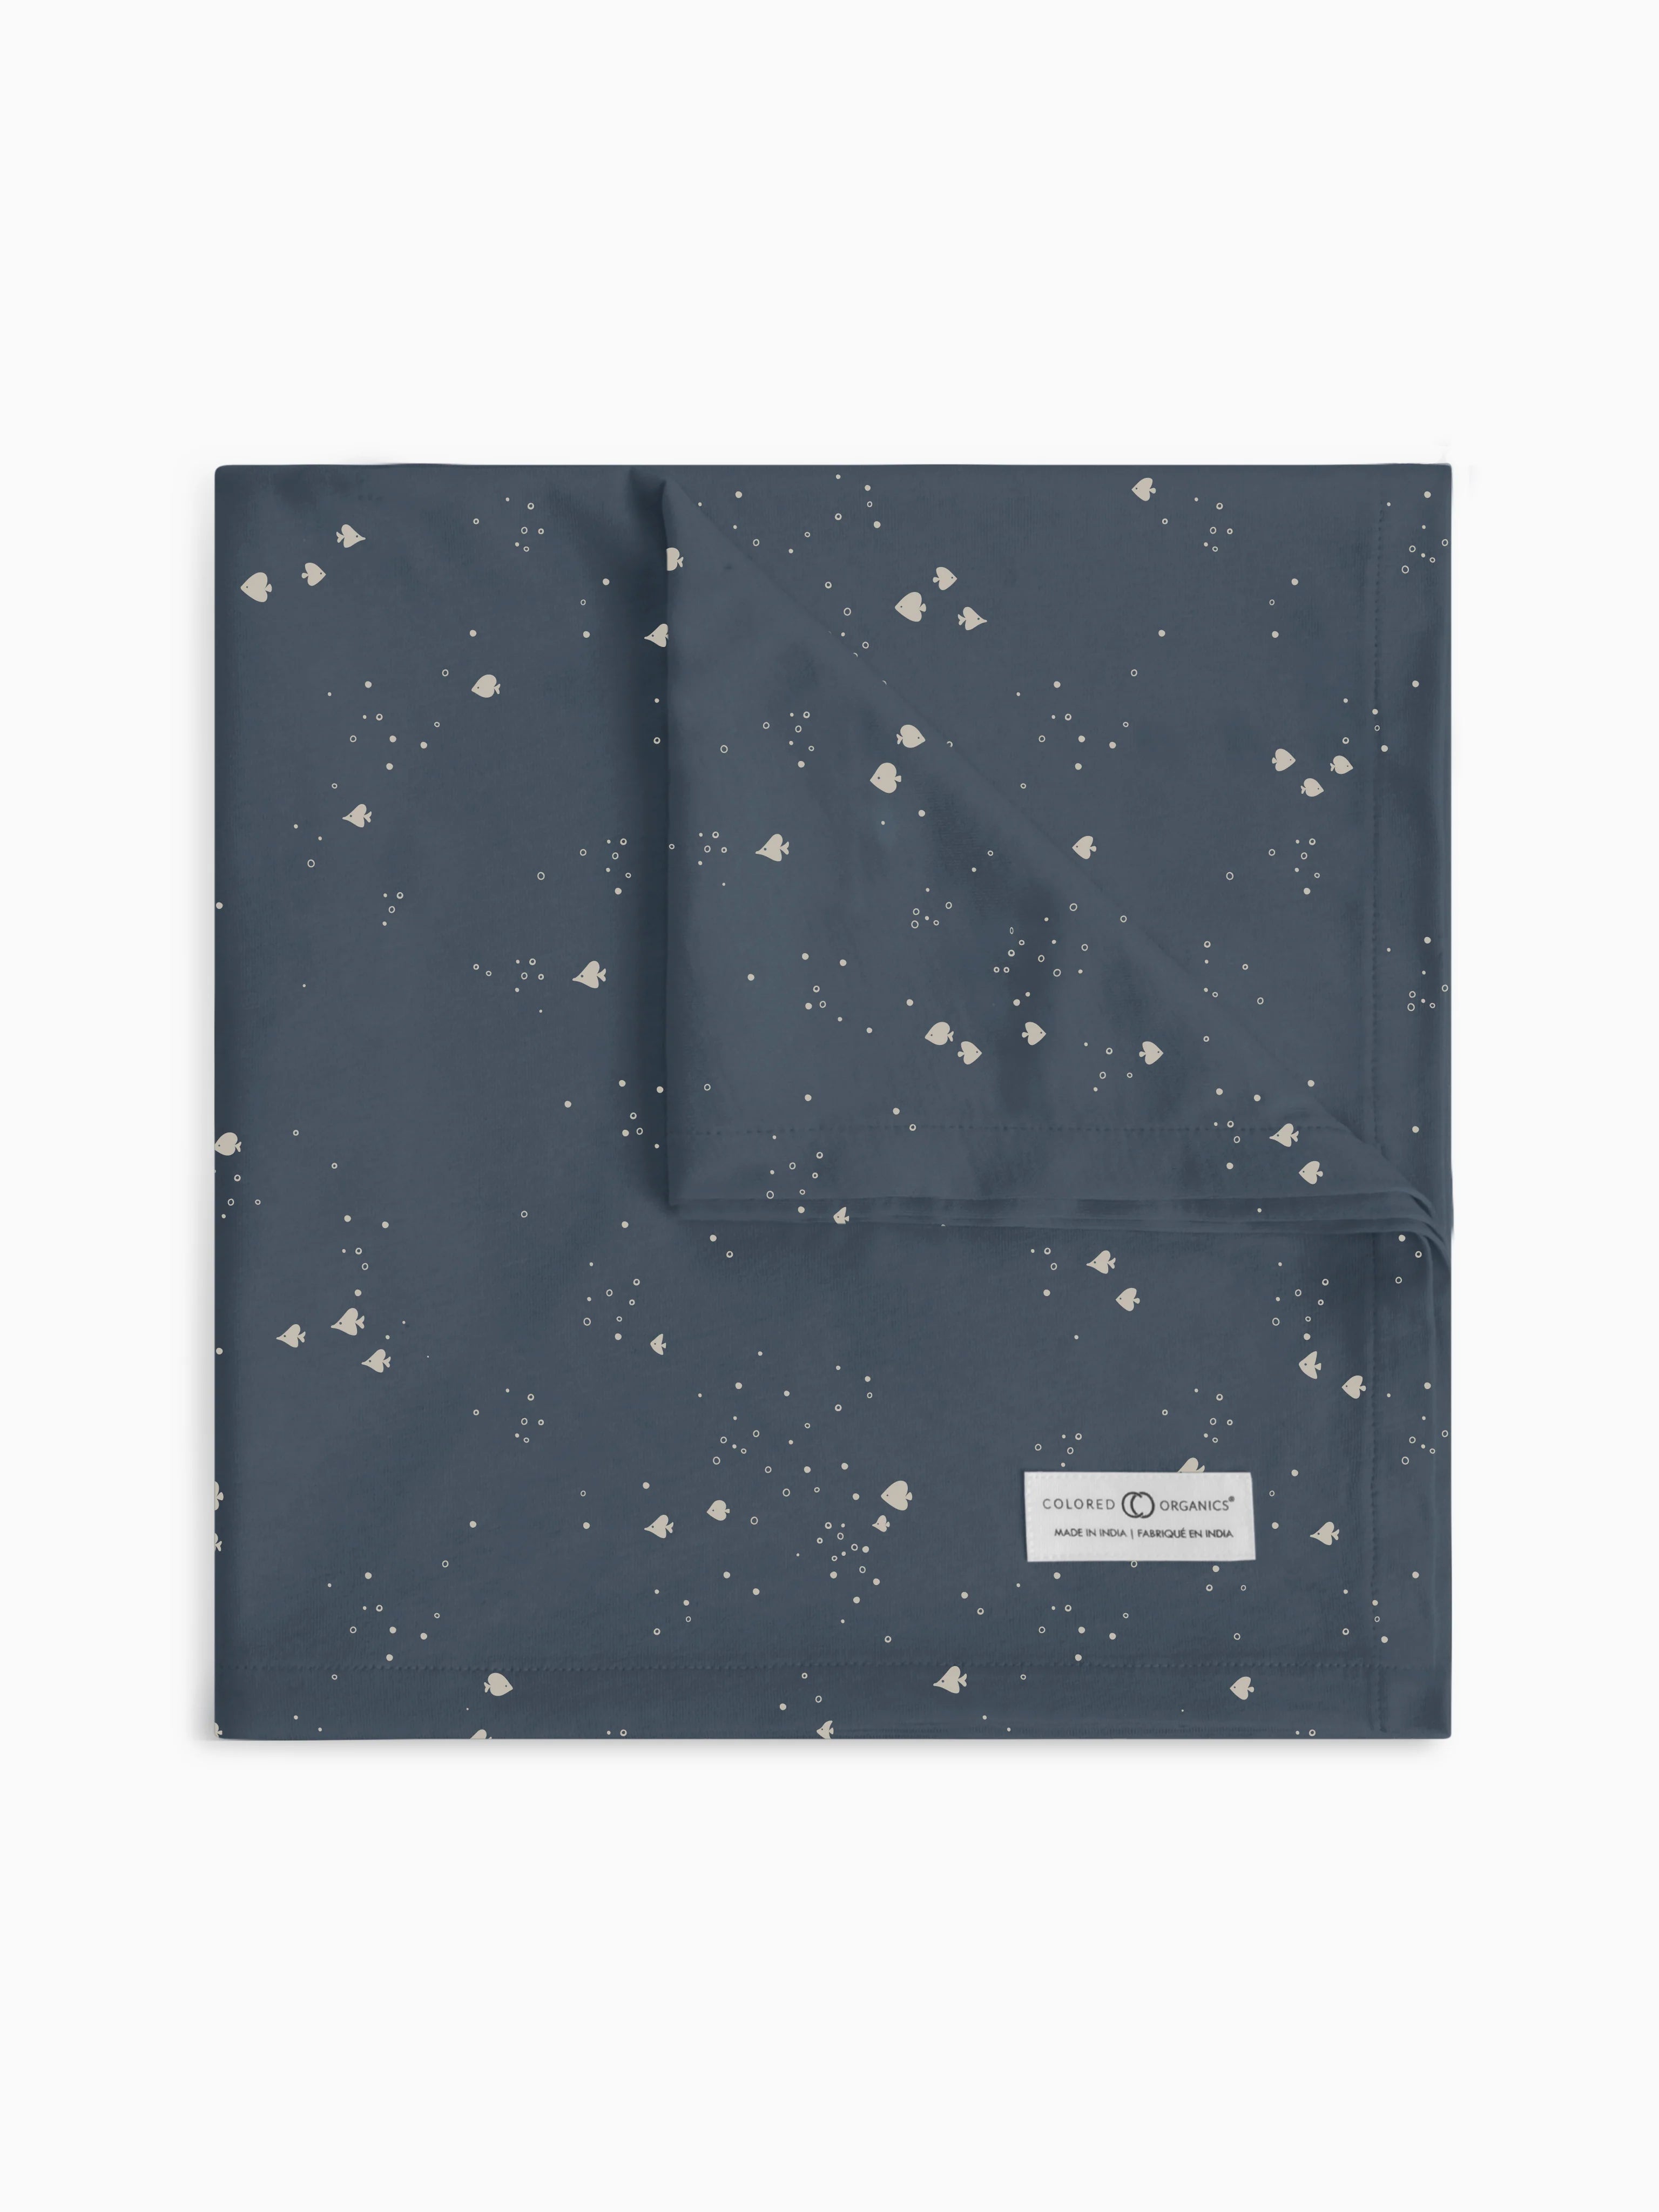 Colored Organics swaddle blanket in 'School of Fish - Harbor' design displayed flat, showcasing an array of abstract fish patterns on a navy blue background